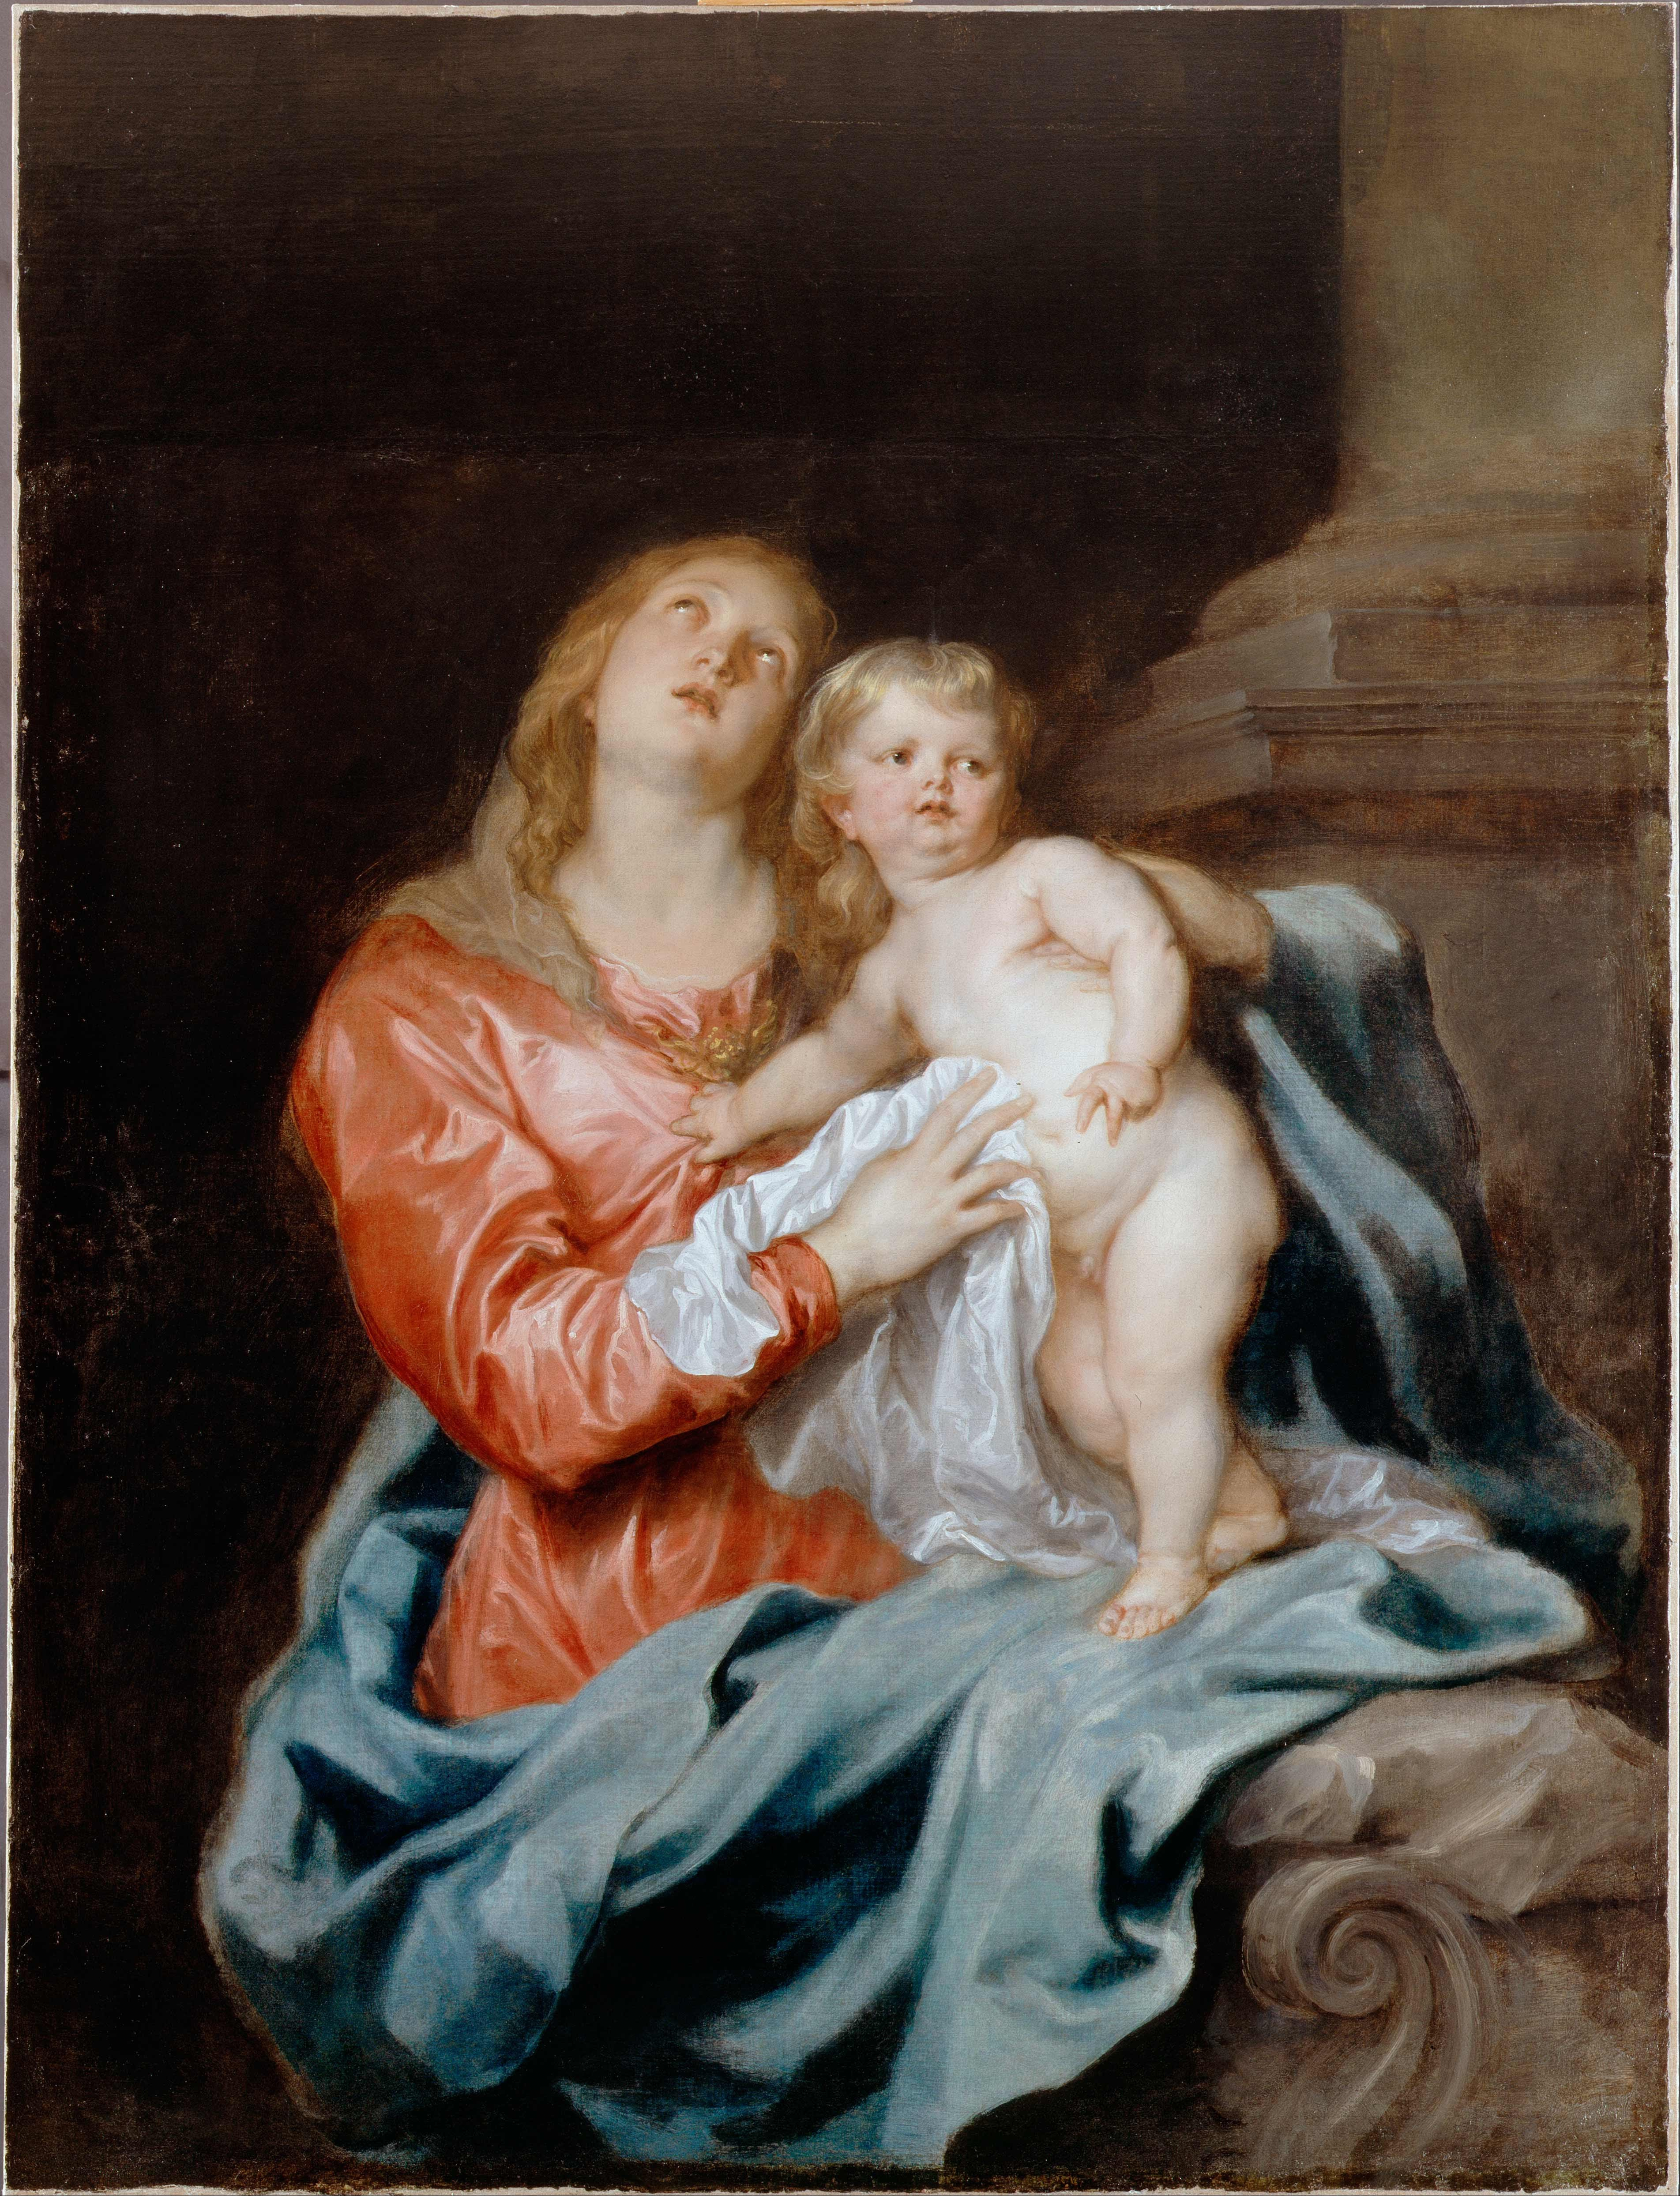 File:Van Dyck, Sir Anthony - The Madonna and Child - Google Art